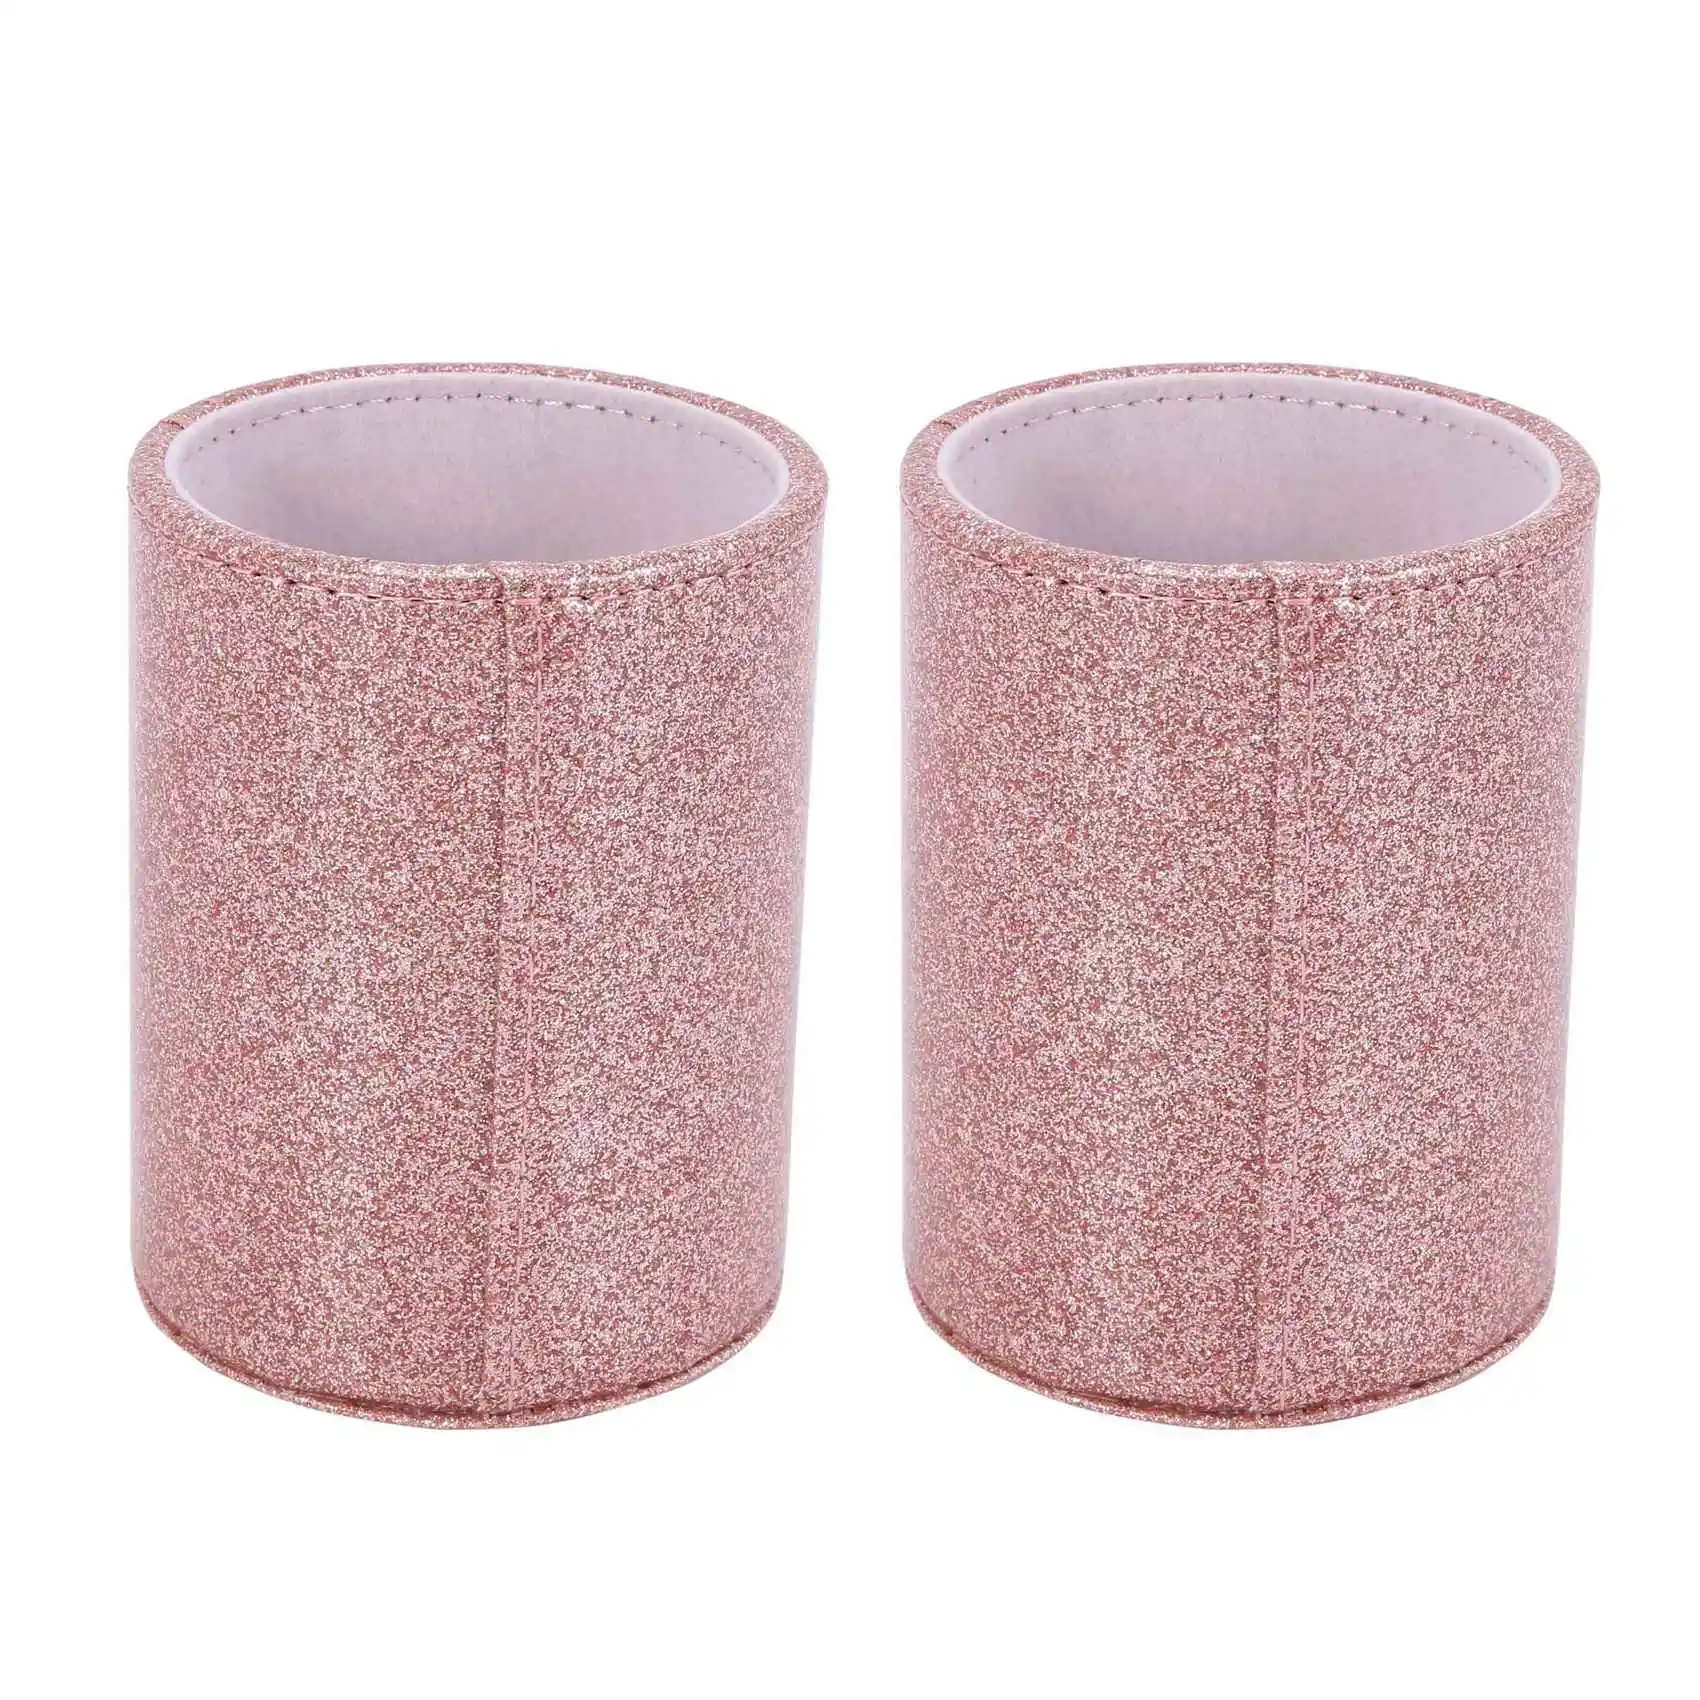 

2X PU Glitter Pen Holder Pencil Cup Shiny Makeup Brush Holder Organizer Cup For Desk Office Classroom Home (Rose Gold)